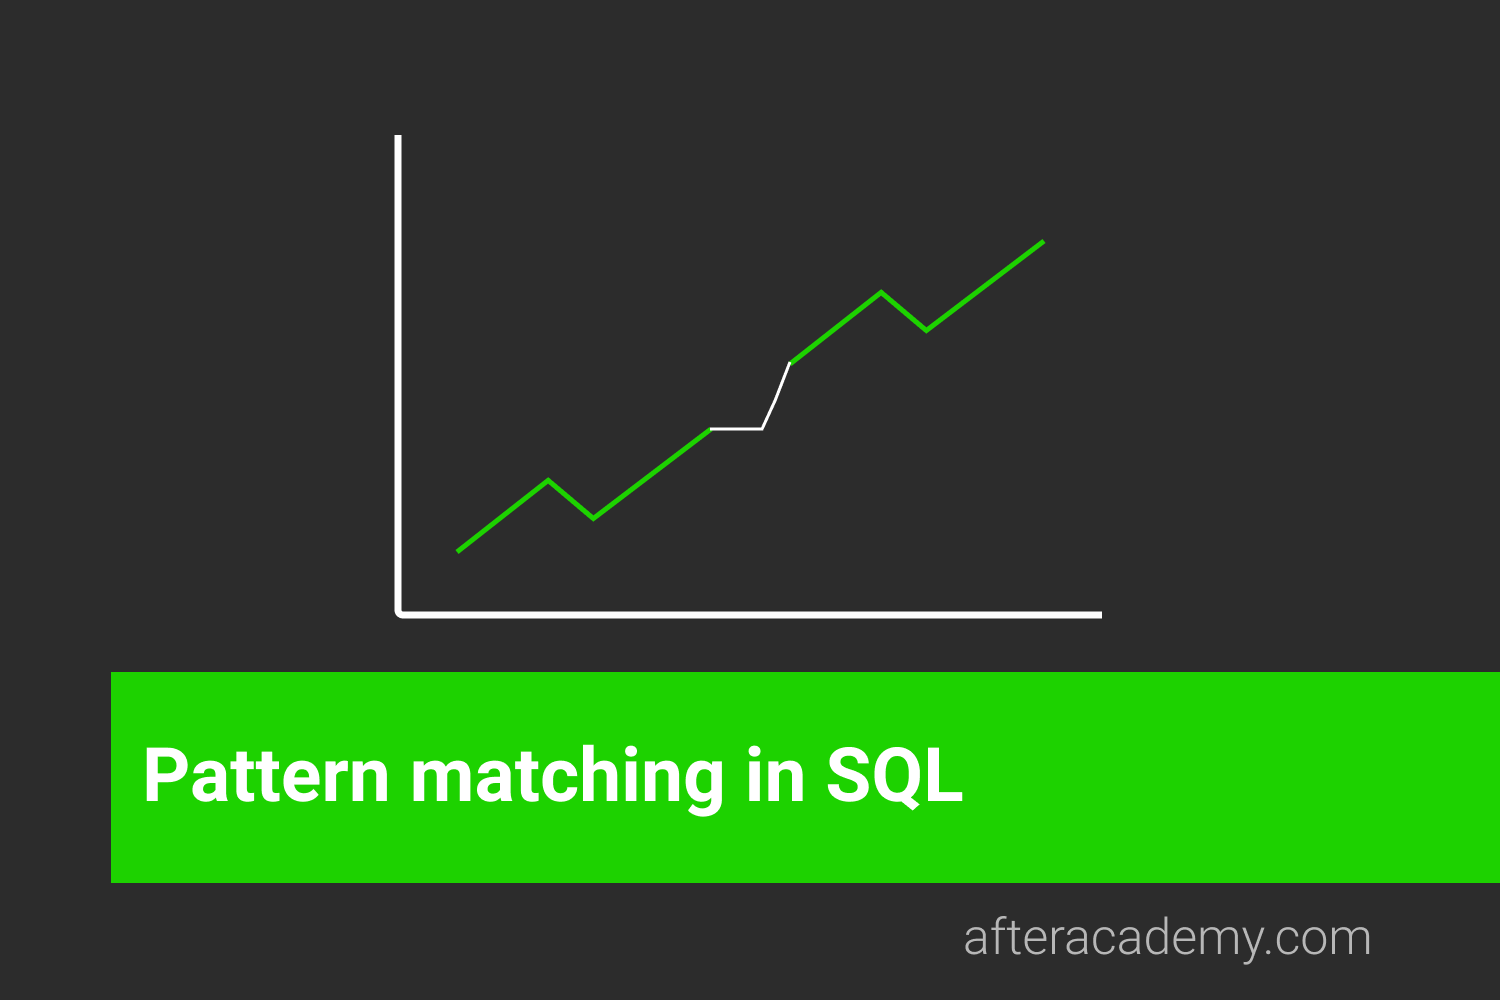 What is Pattern matching in SQL and how it is done?